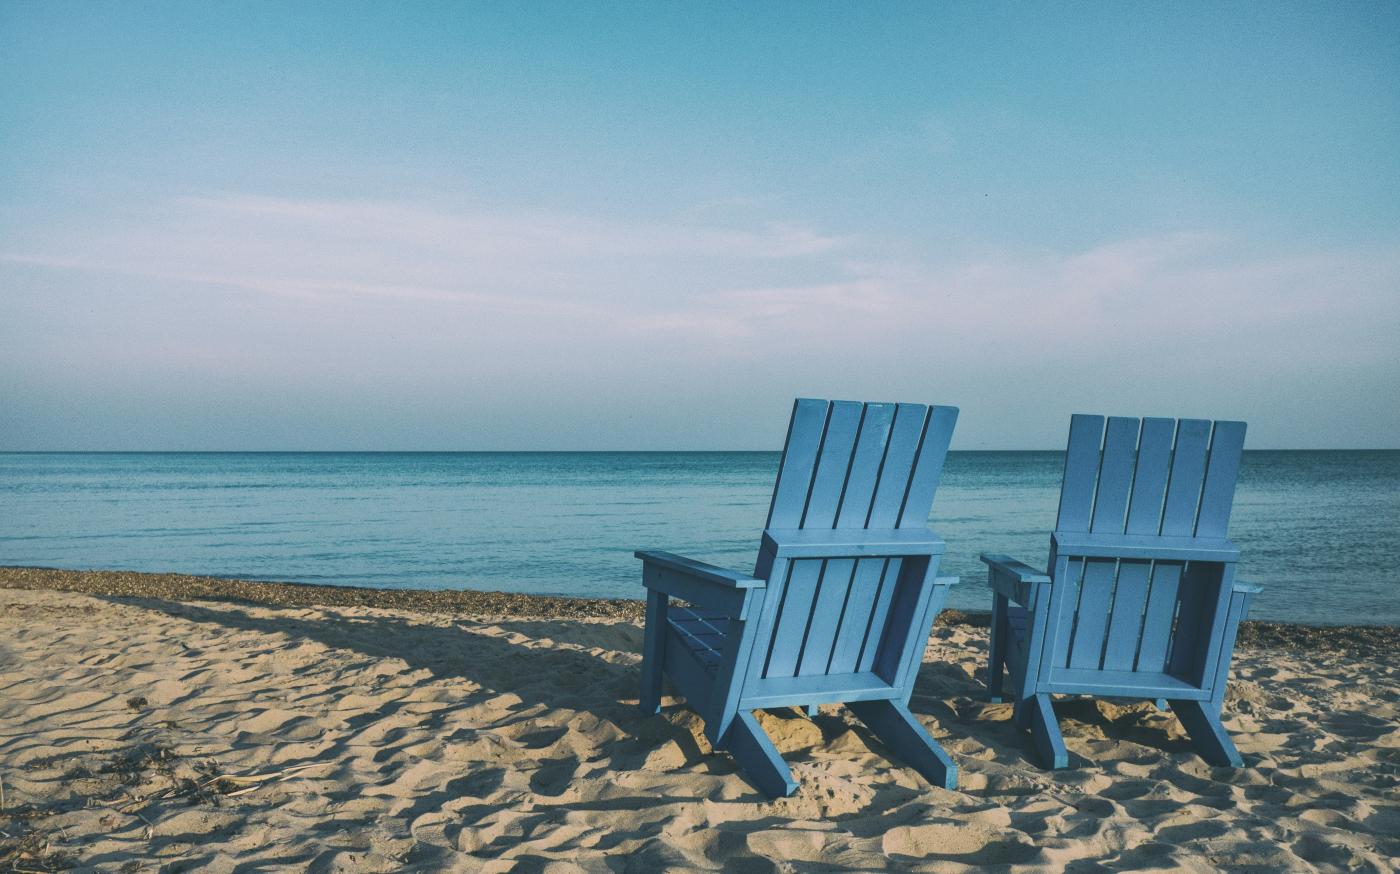 two blue beach chairs near body of water by Aaron Burden courtesy of Unsplash.